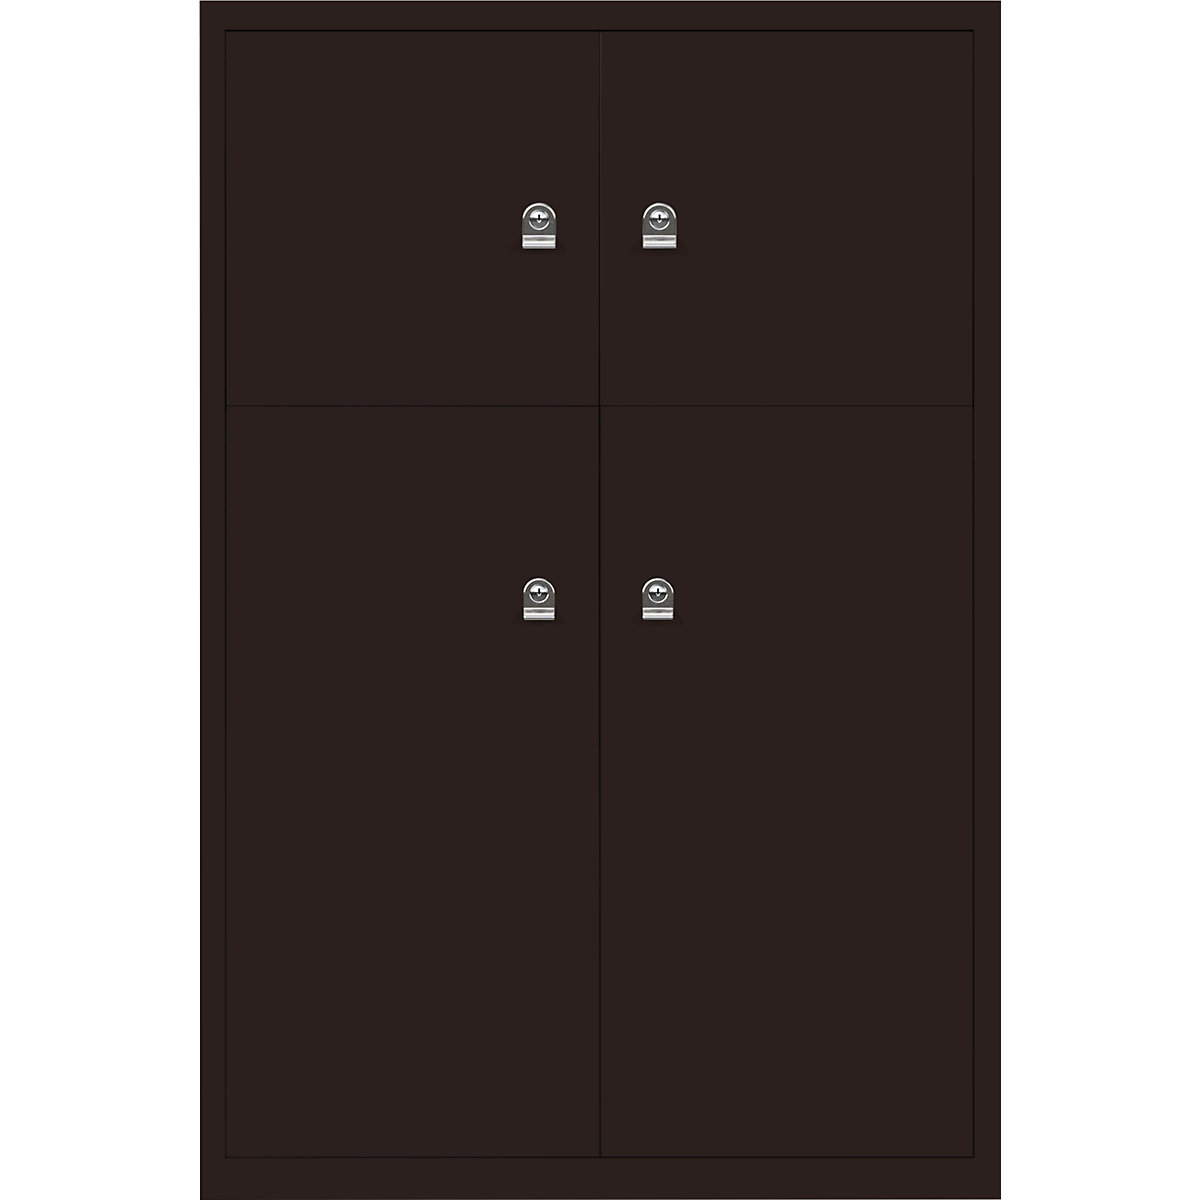 BISLEY – LateralFile™ lodge, with 4 lockable compartments, height 2 x 375 mm, 2 x 755 mm, sepia brown